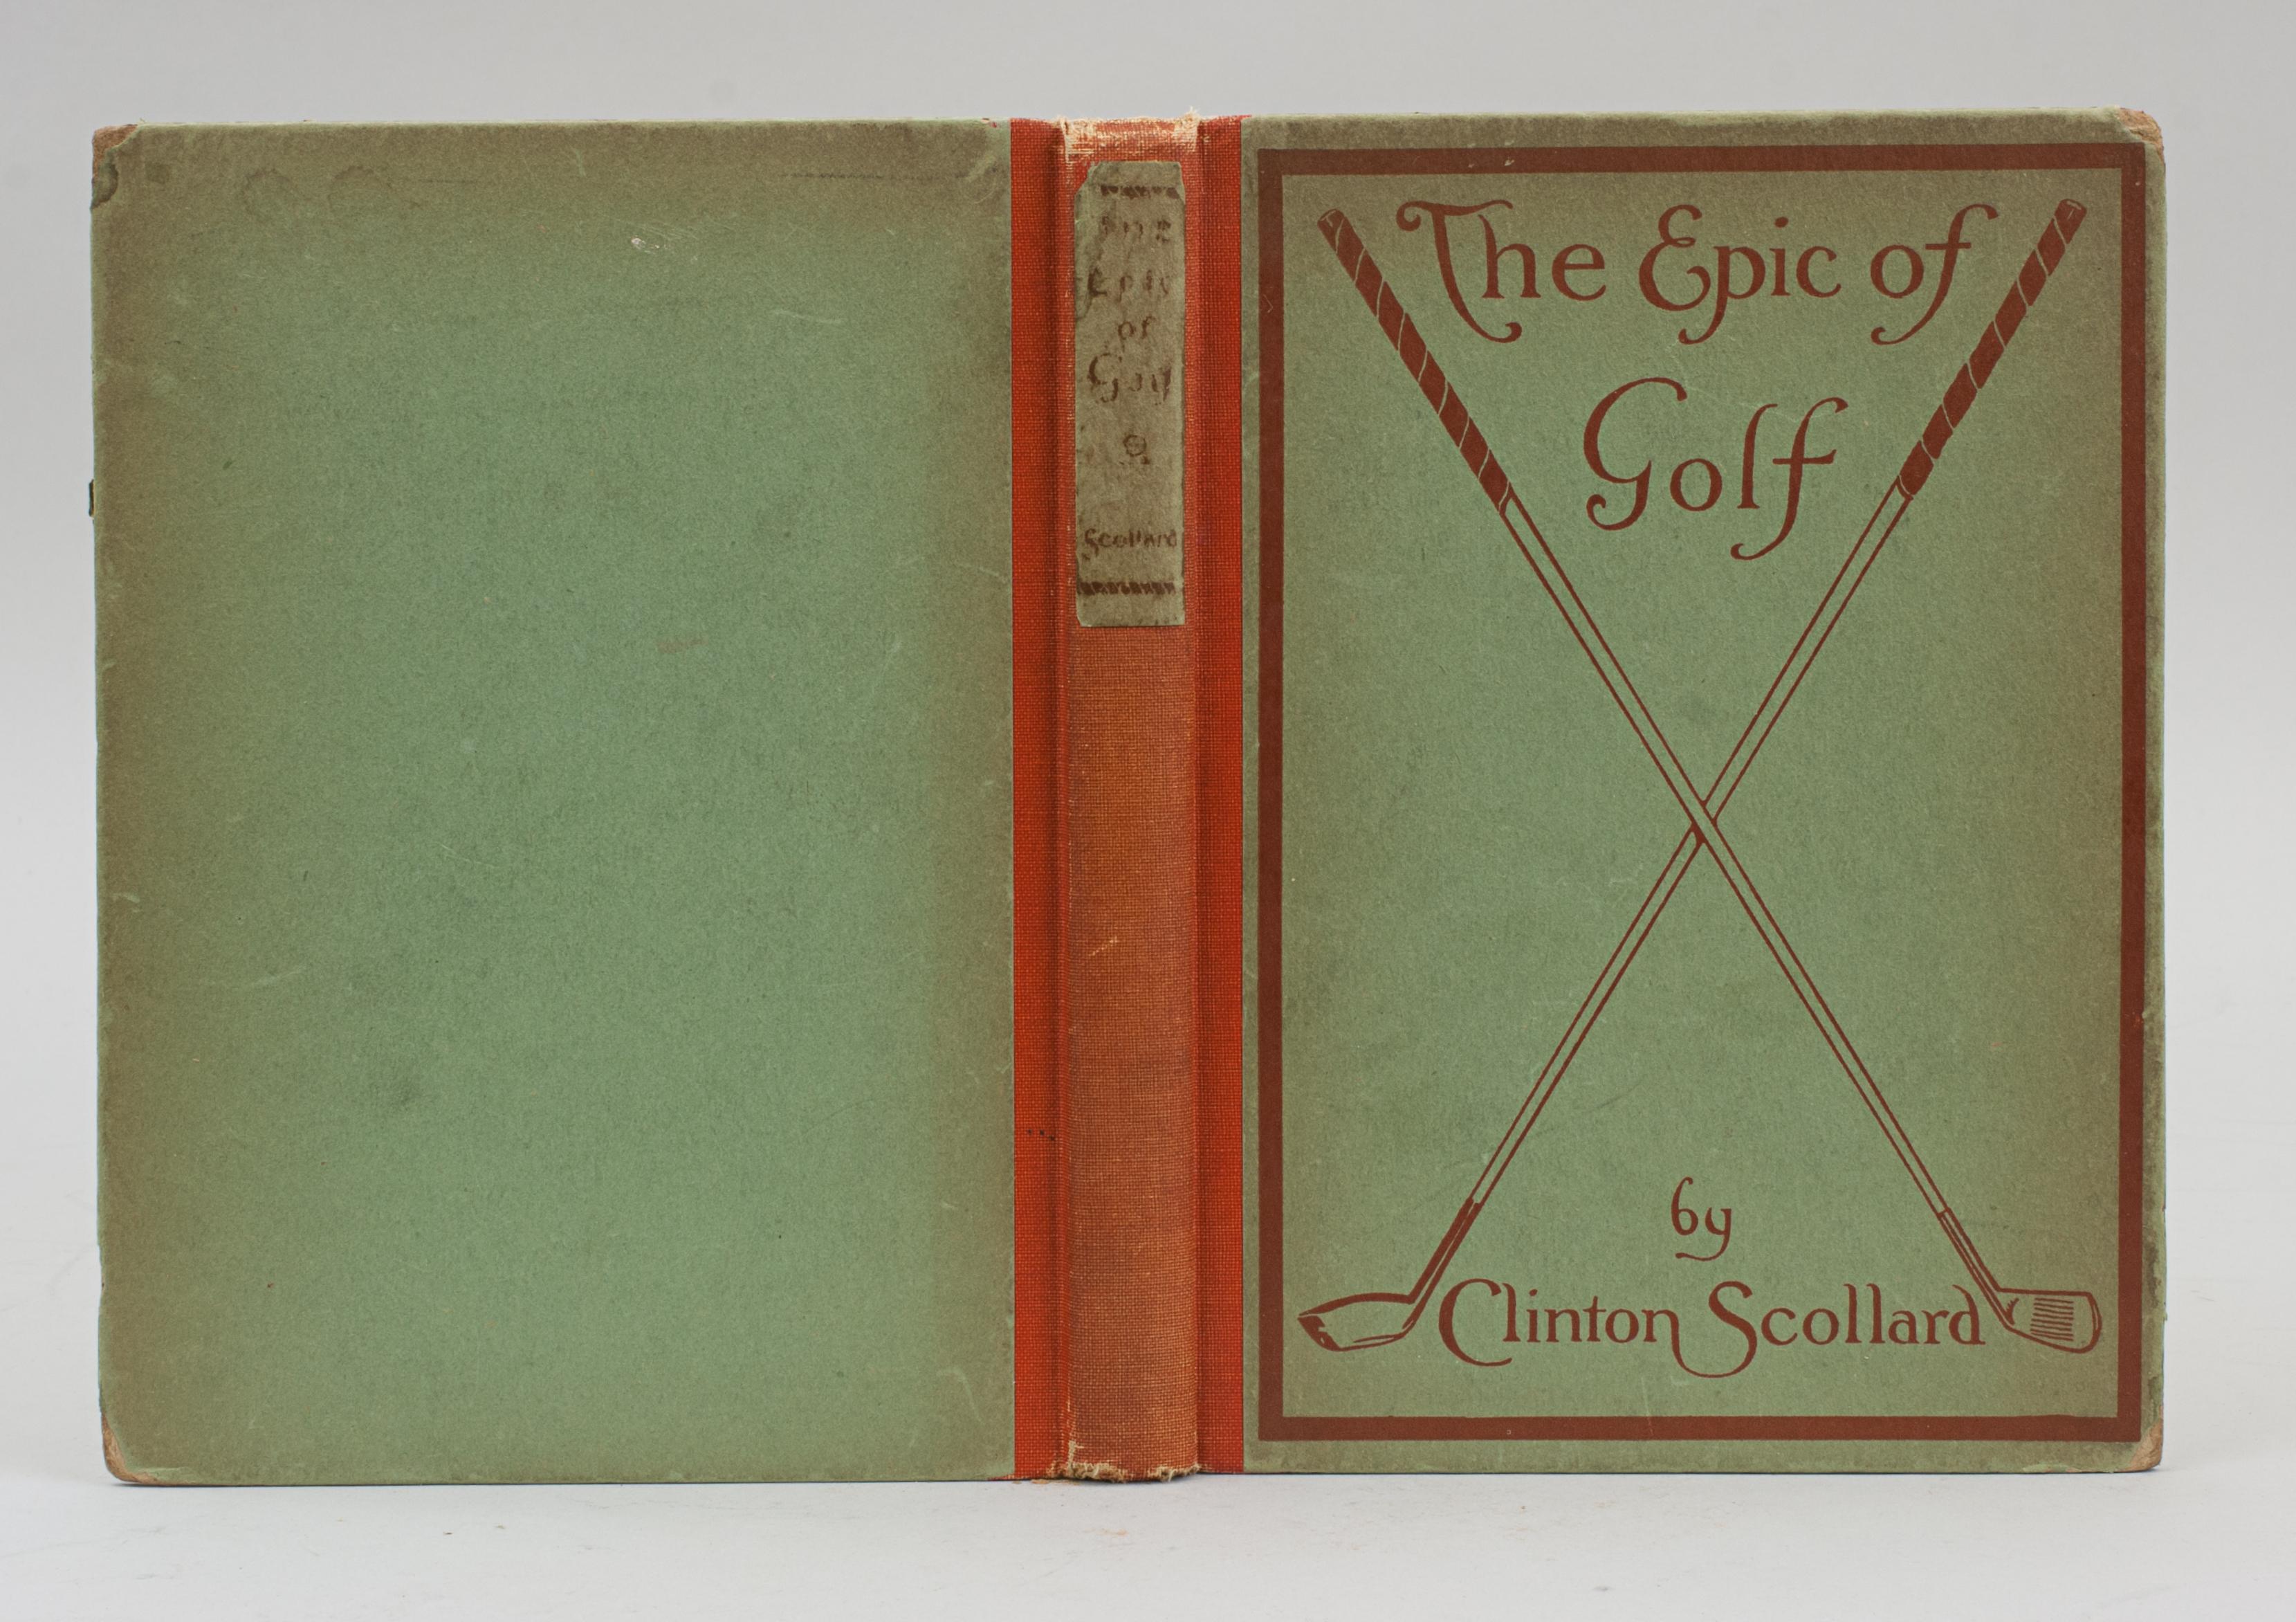 The Epic Of Golf By Clinton Scollard.
A very well produced first edition golf poetry book, The Epic Of Golf By Clinton Scollard. Published in 1923 by Houghton Mifflin & Co Boston and New York, The Riverside Press Cambridge. This is a hard bound copy